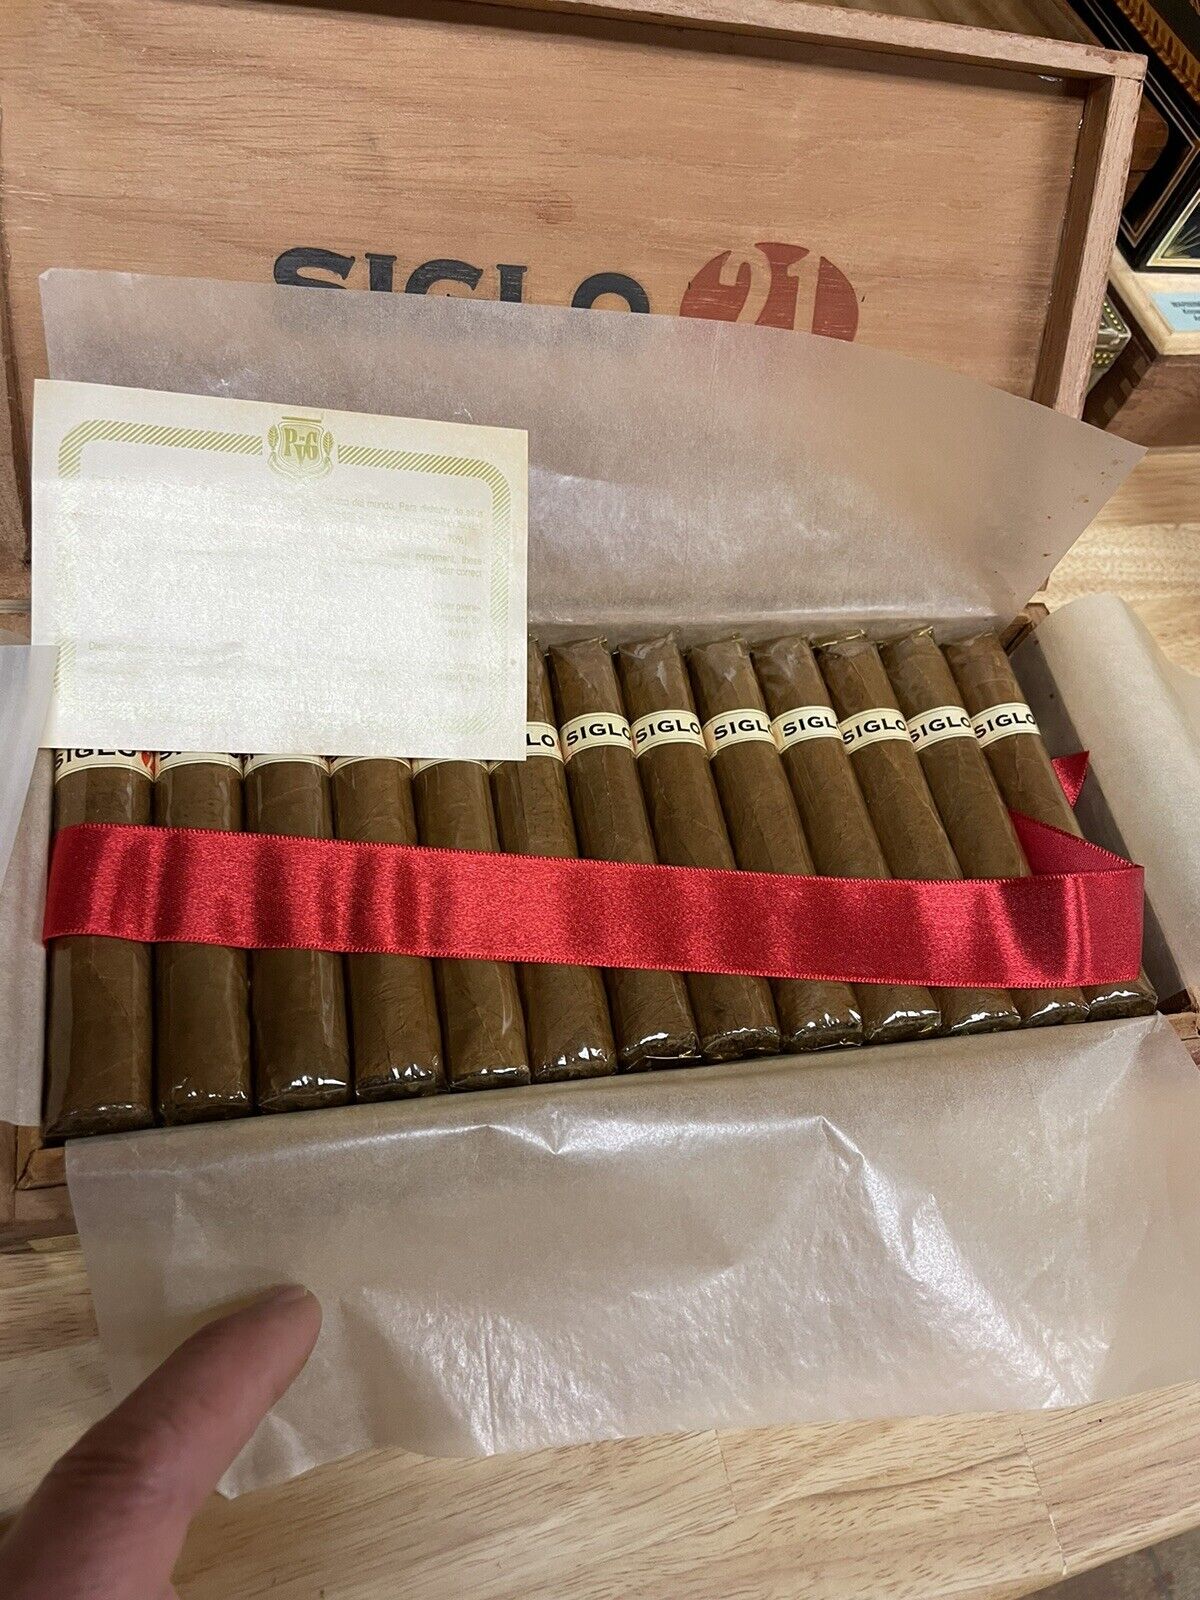 Vintage Siglo 21   25 Cigar With Box And God Condition Ready To Enjoy